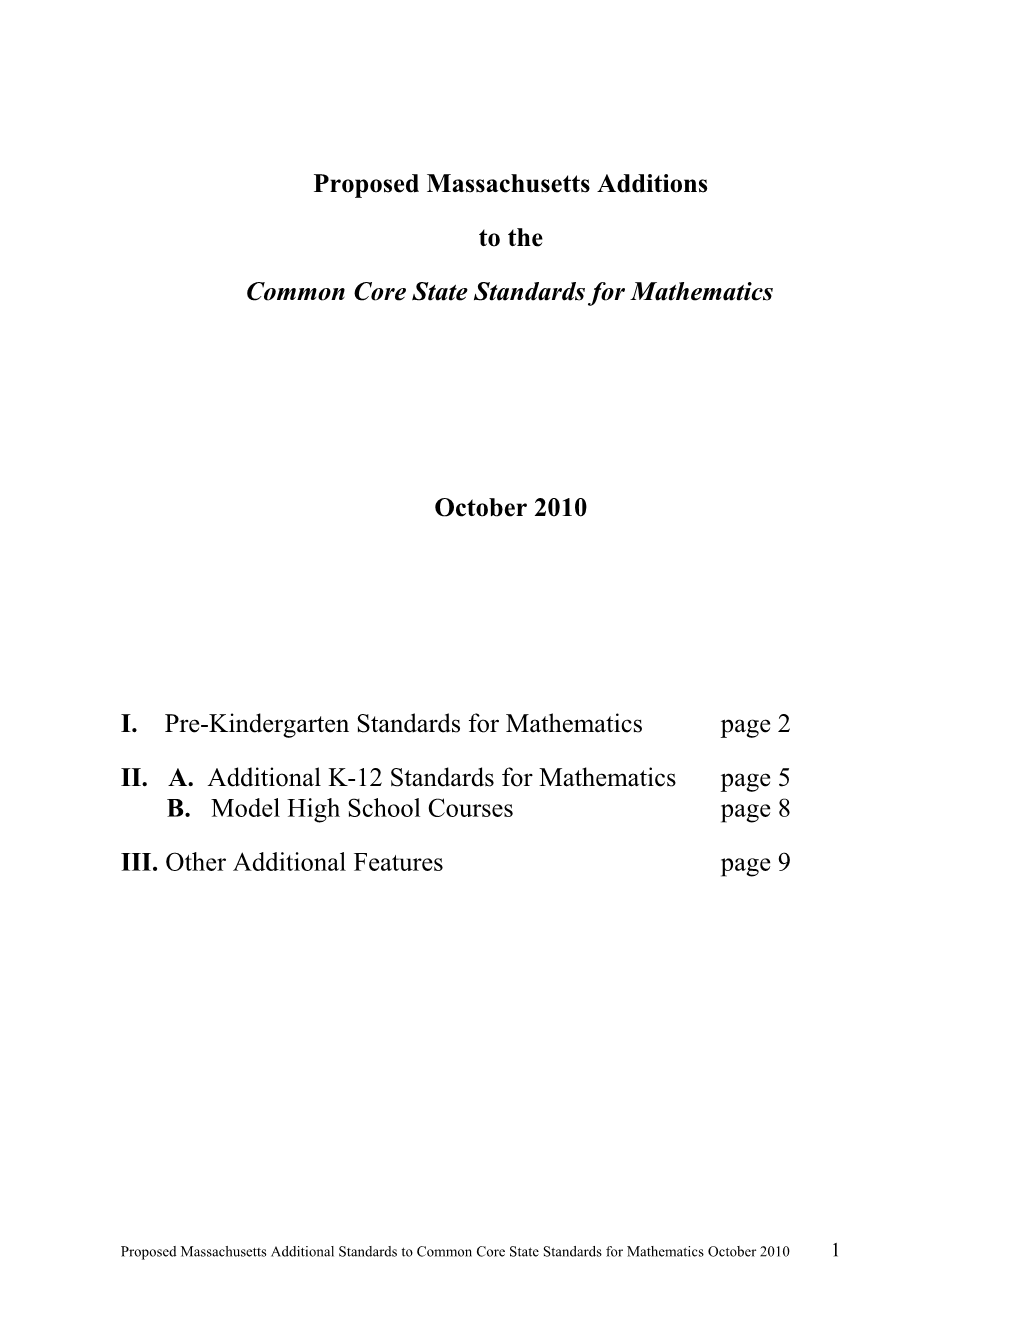 Proposed Massachusetts Additions to the Common Core State Standards for Mathematics, October